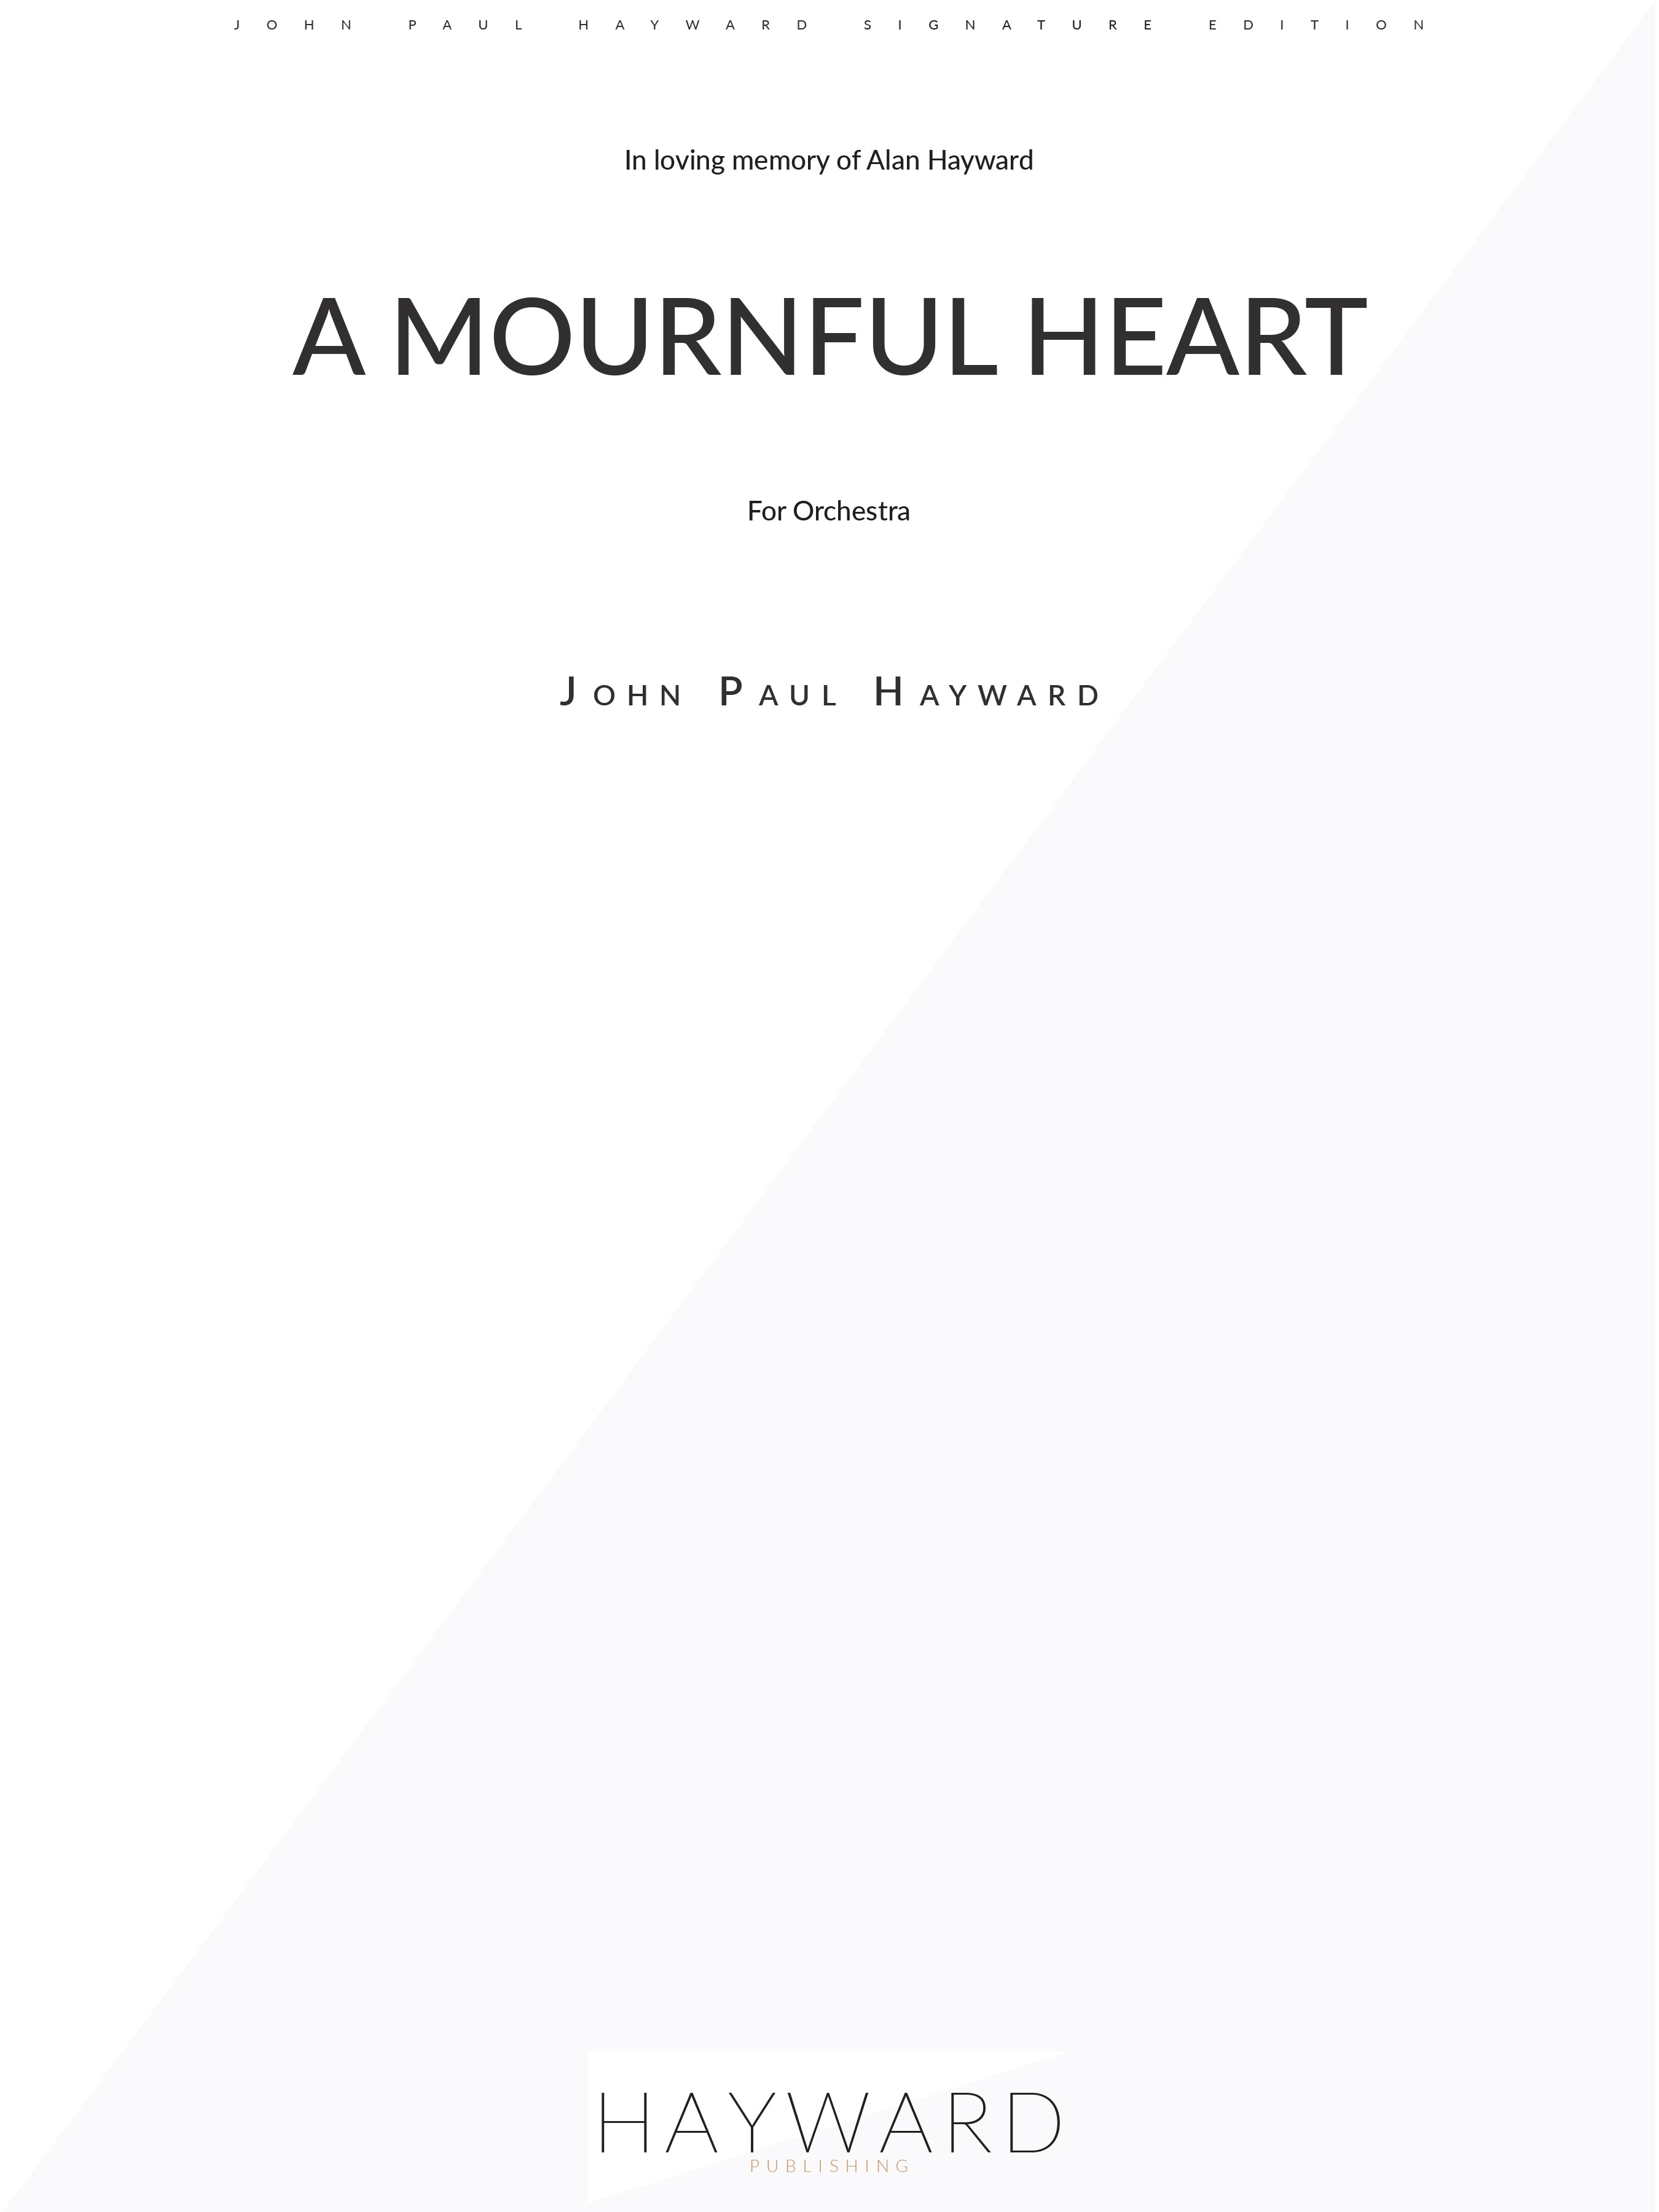 A Mournful Heart